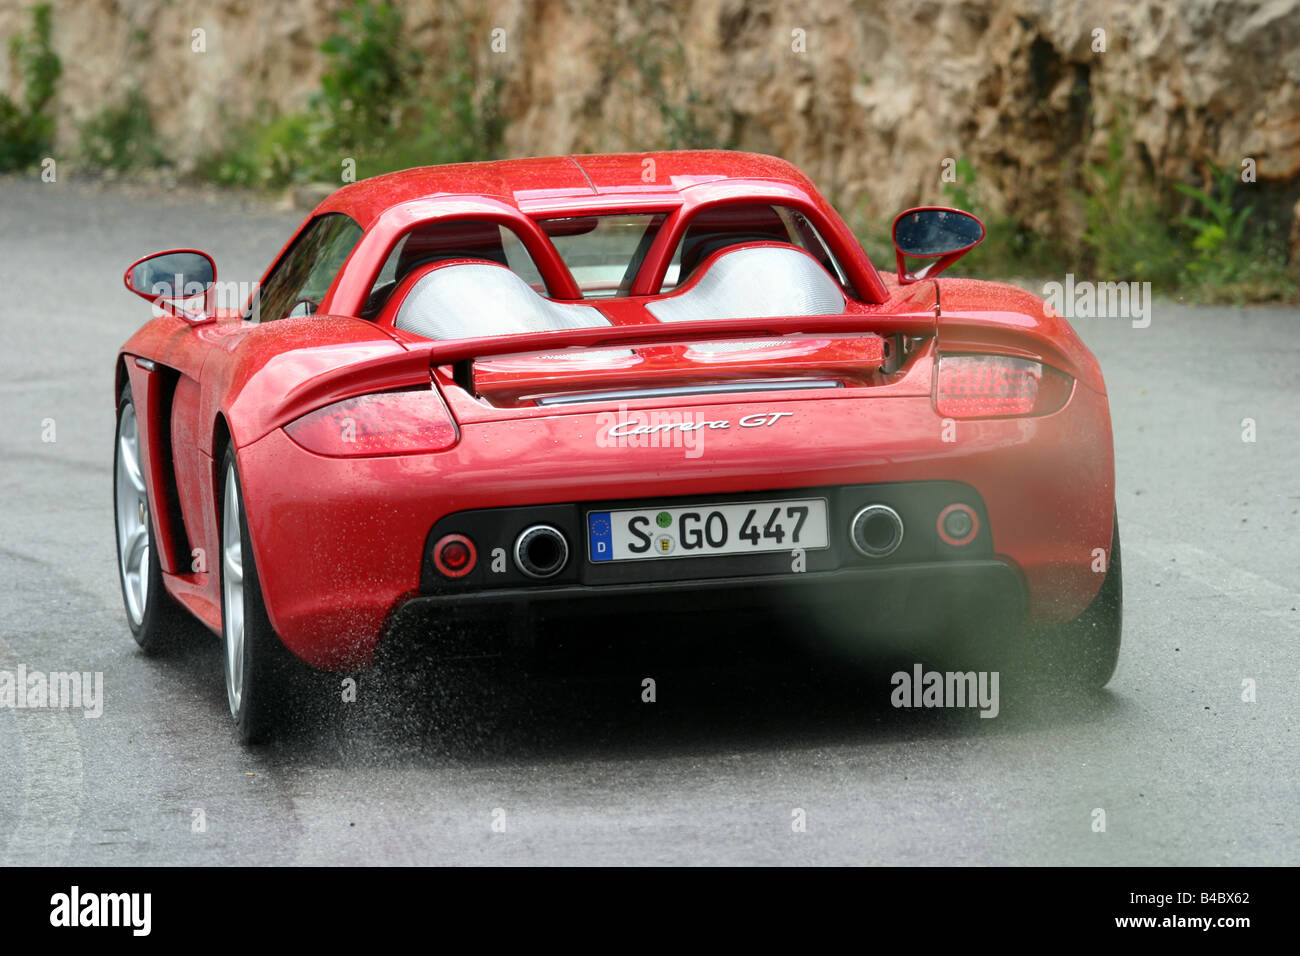 Car, Porsche Carrera GT, roadster, model year 2003-, Coupe/coupe, red,  driving, diagonal from the back, rear view, country road Stock Photo - Alamy